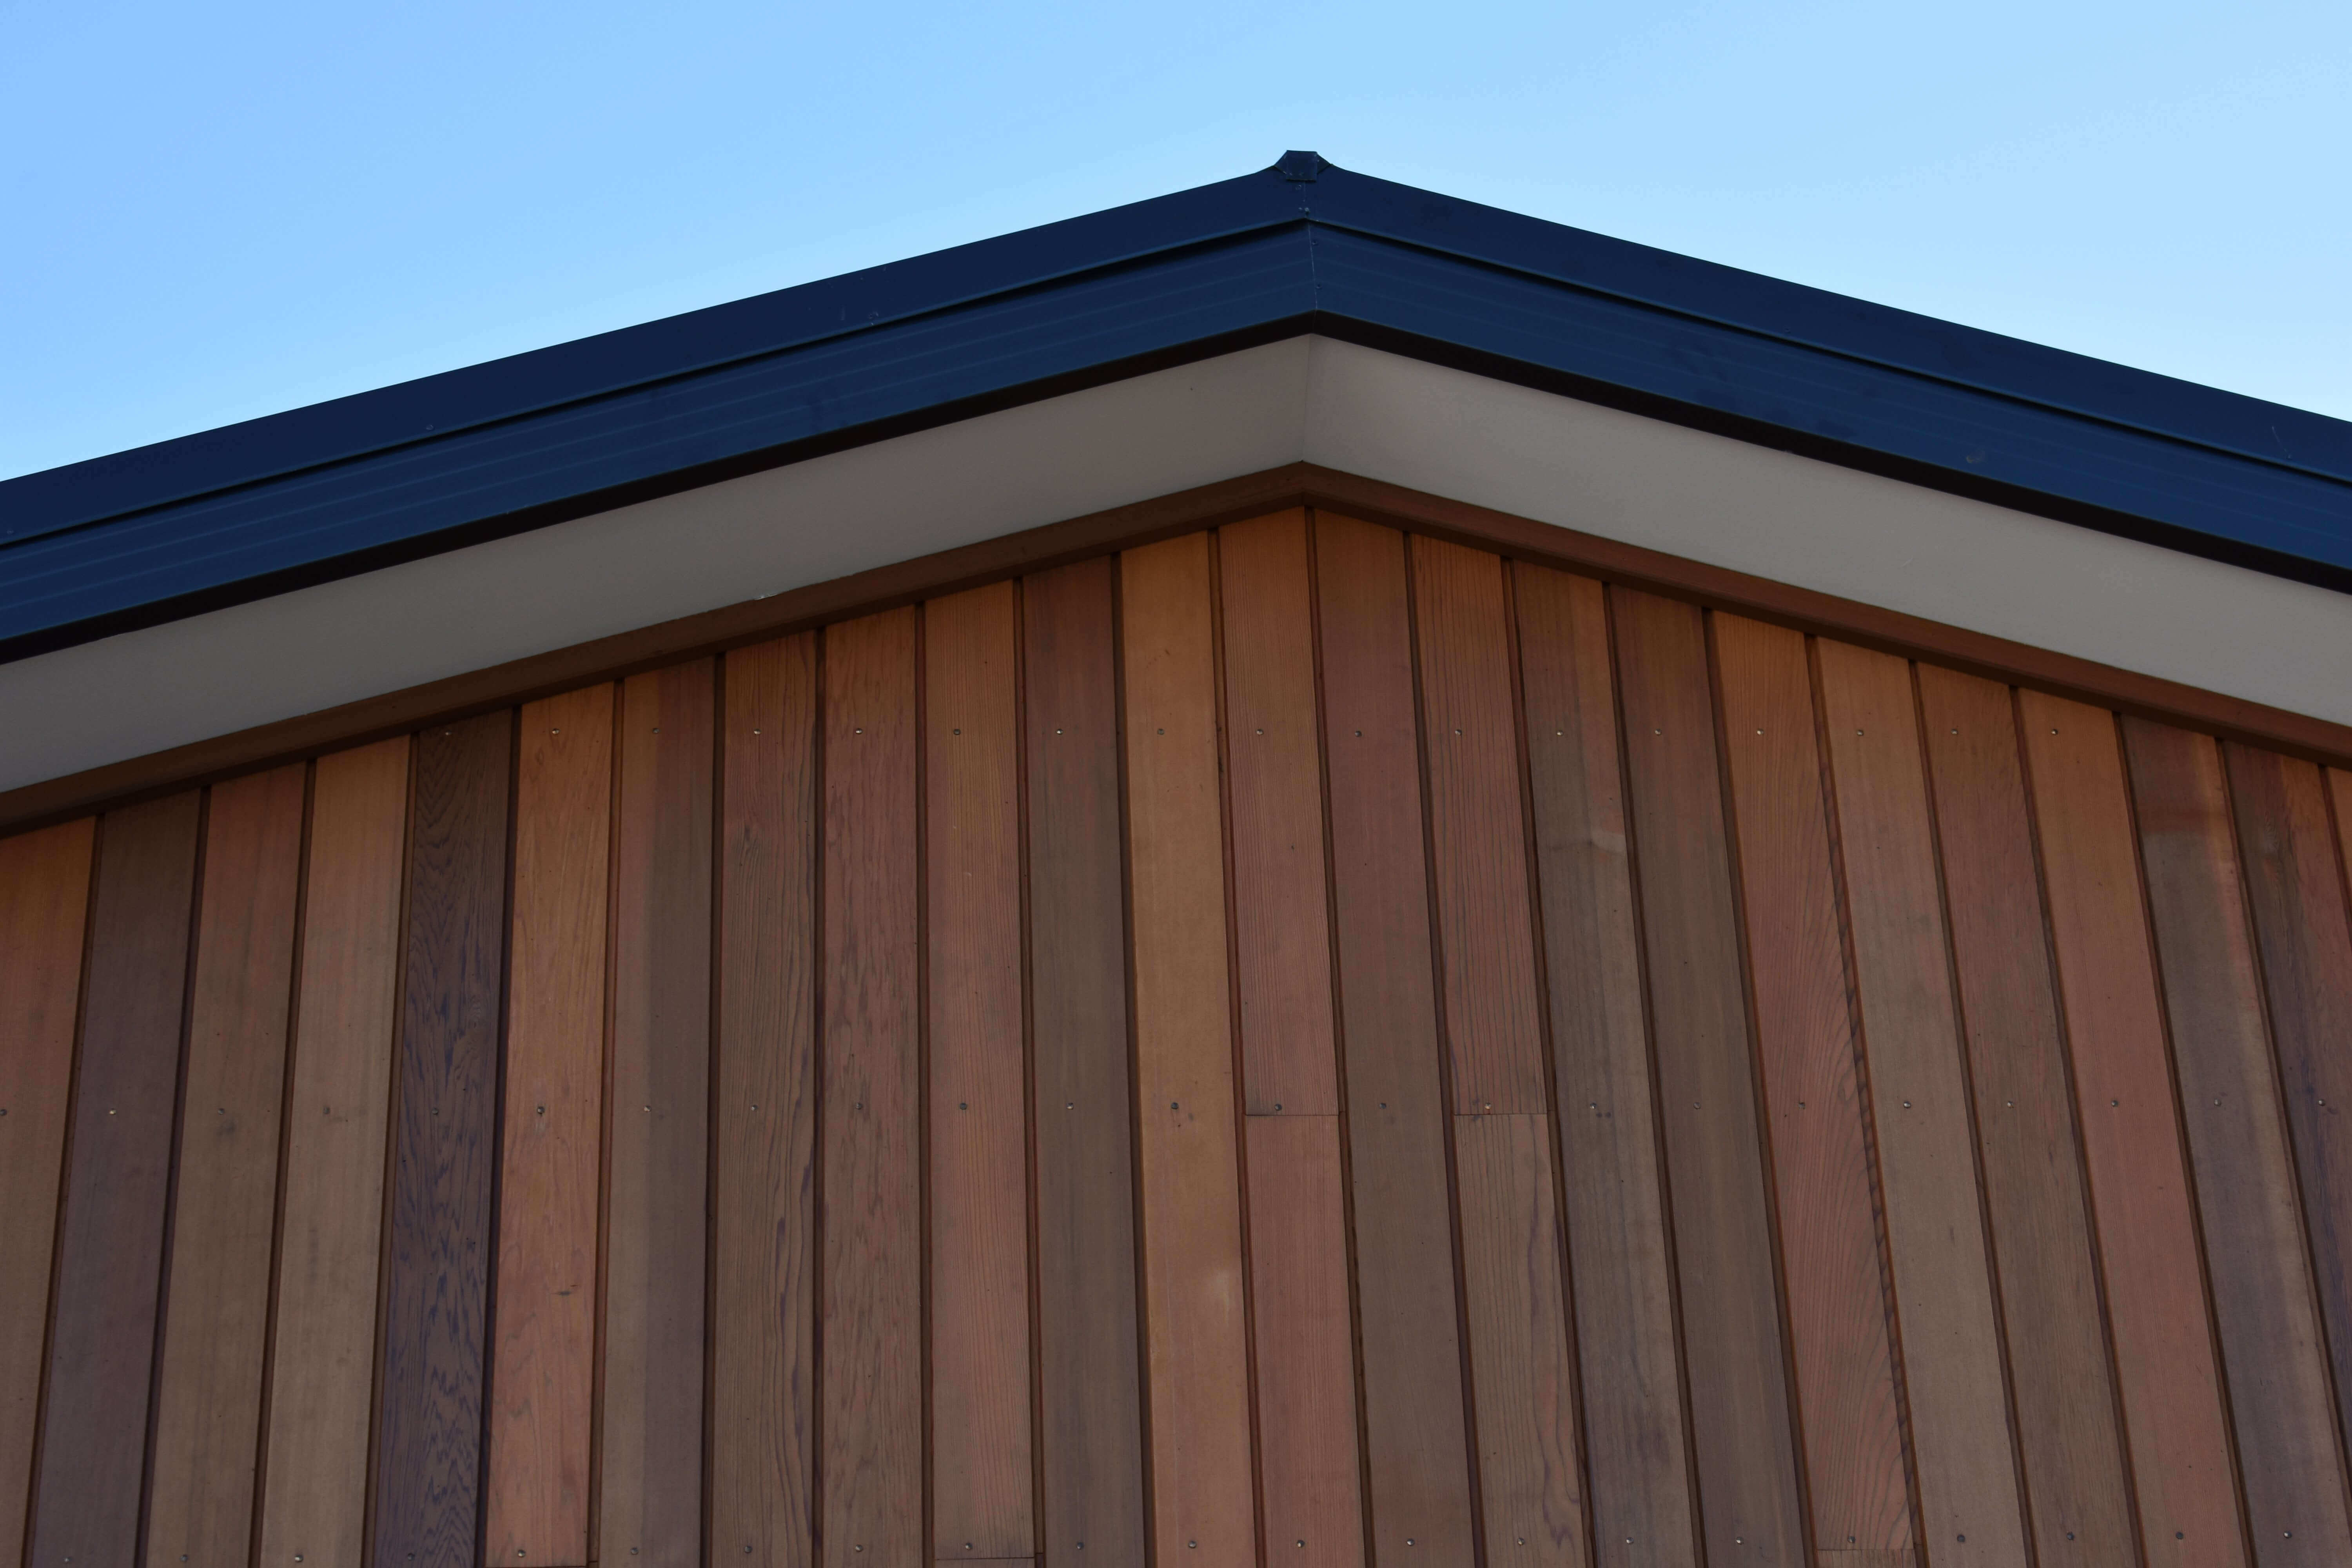 Genius Homes cladding options - standard inclusions.